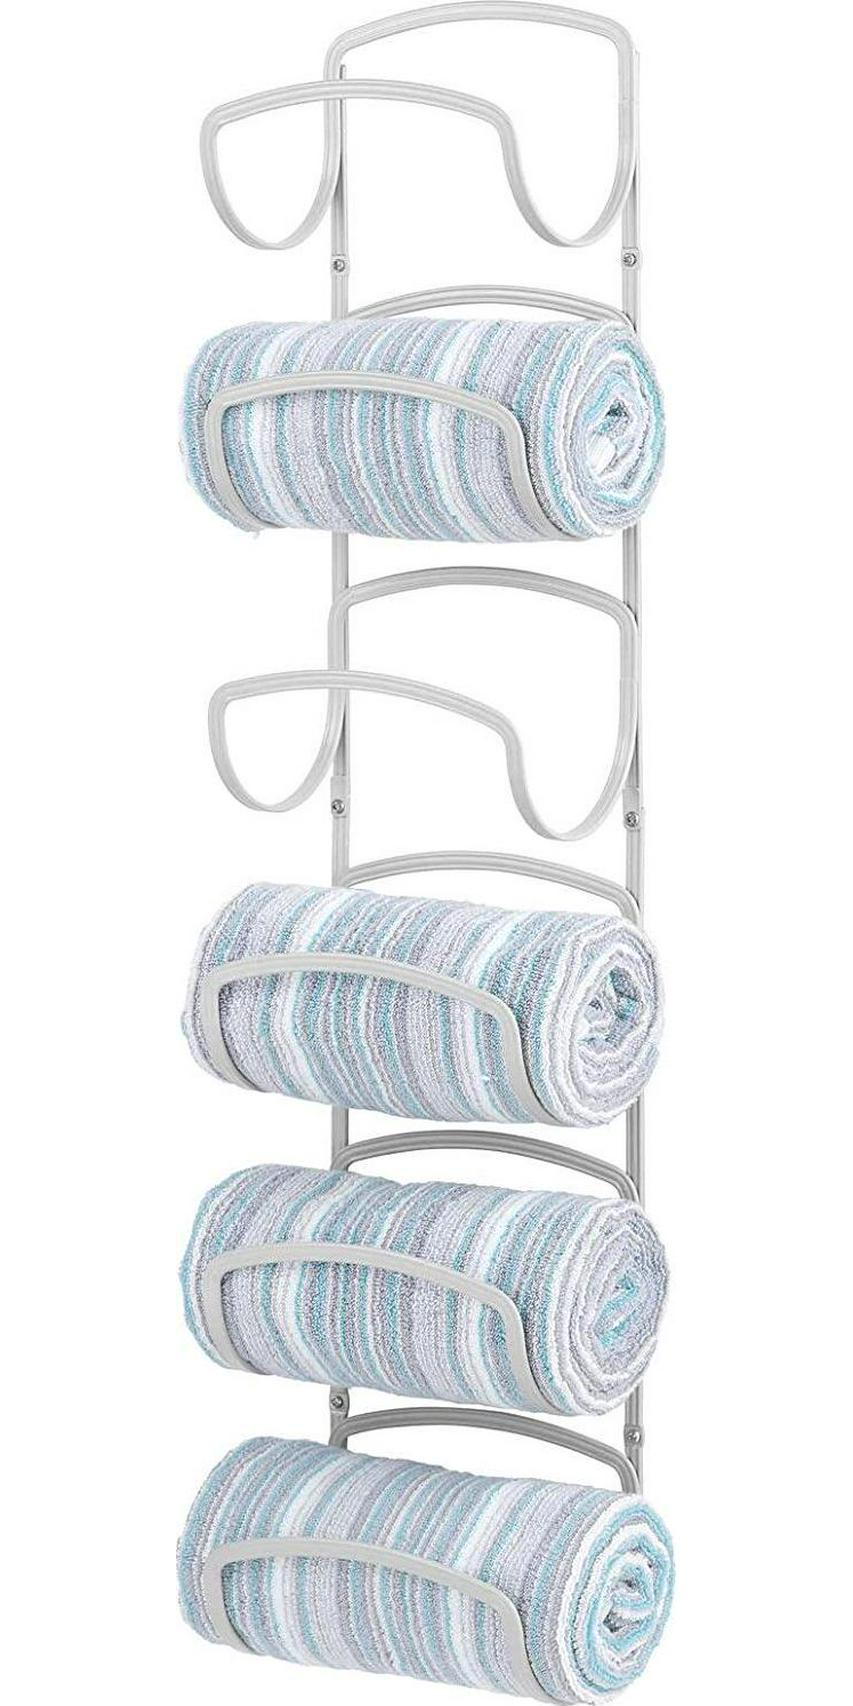 mDesign, mDesign Steel Wall Mount Towel Storage Rack for Bathroom, Kitchen, Utility Room - Holds Hand Towels, Towels, Robes - Easy to Install, Six Levels - Hyde Collection - Light Gray